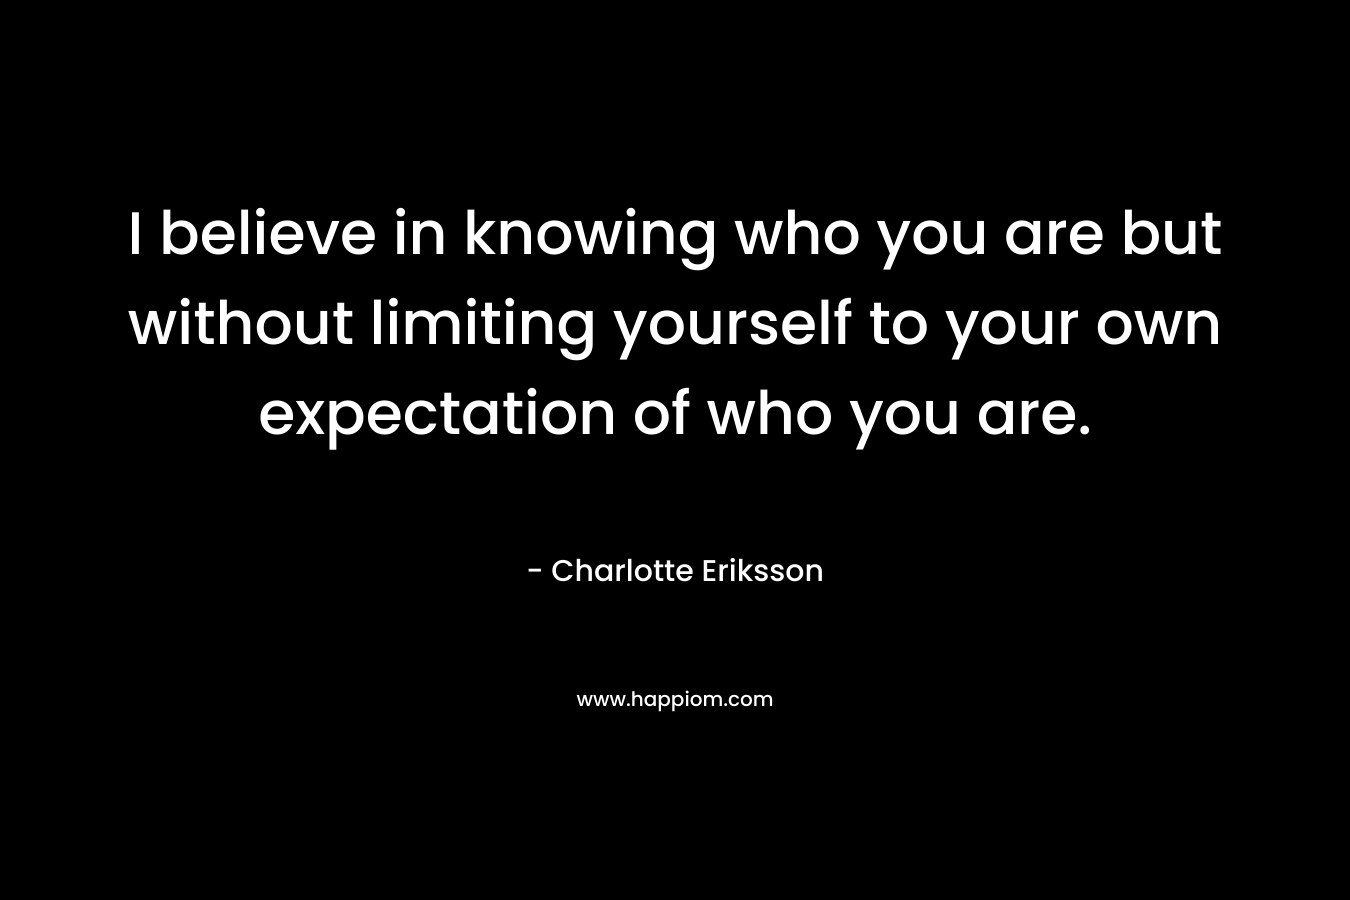 I believe in knowing who you are but without limiting yourself to your own expectation of who you are.